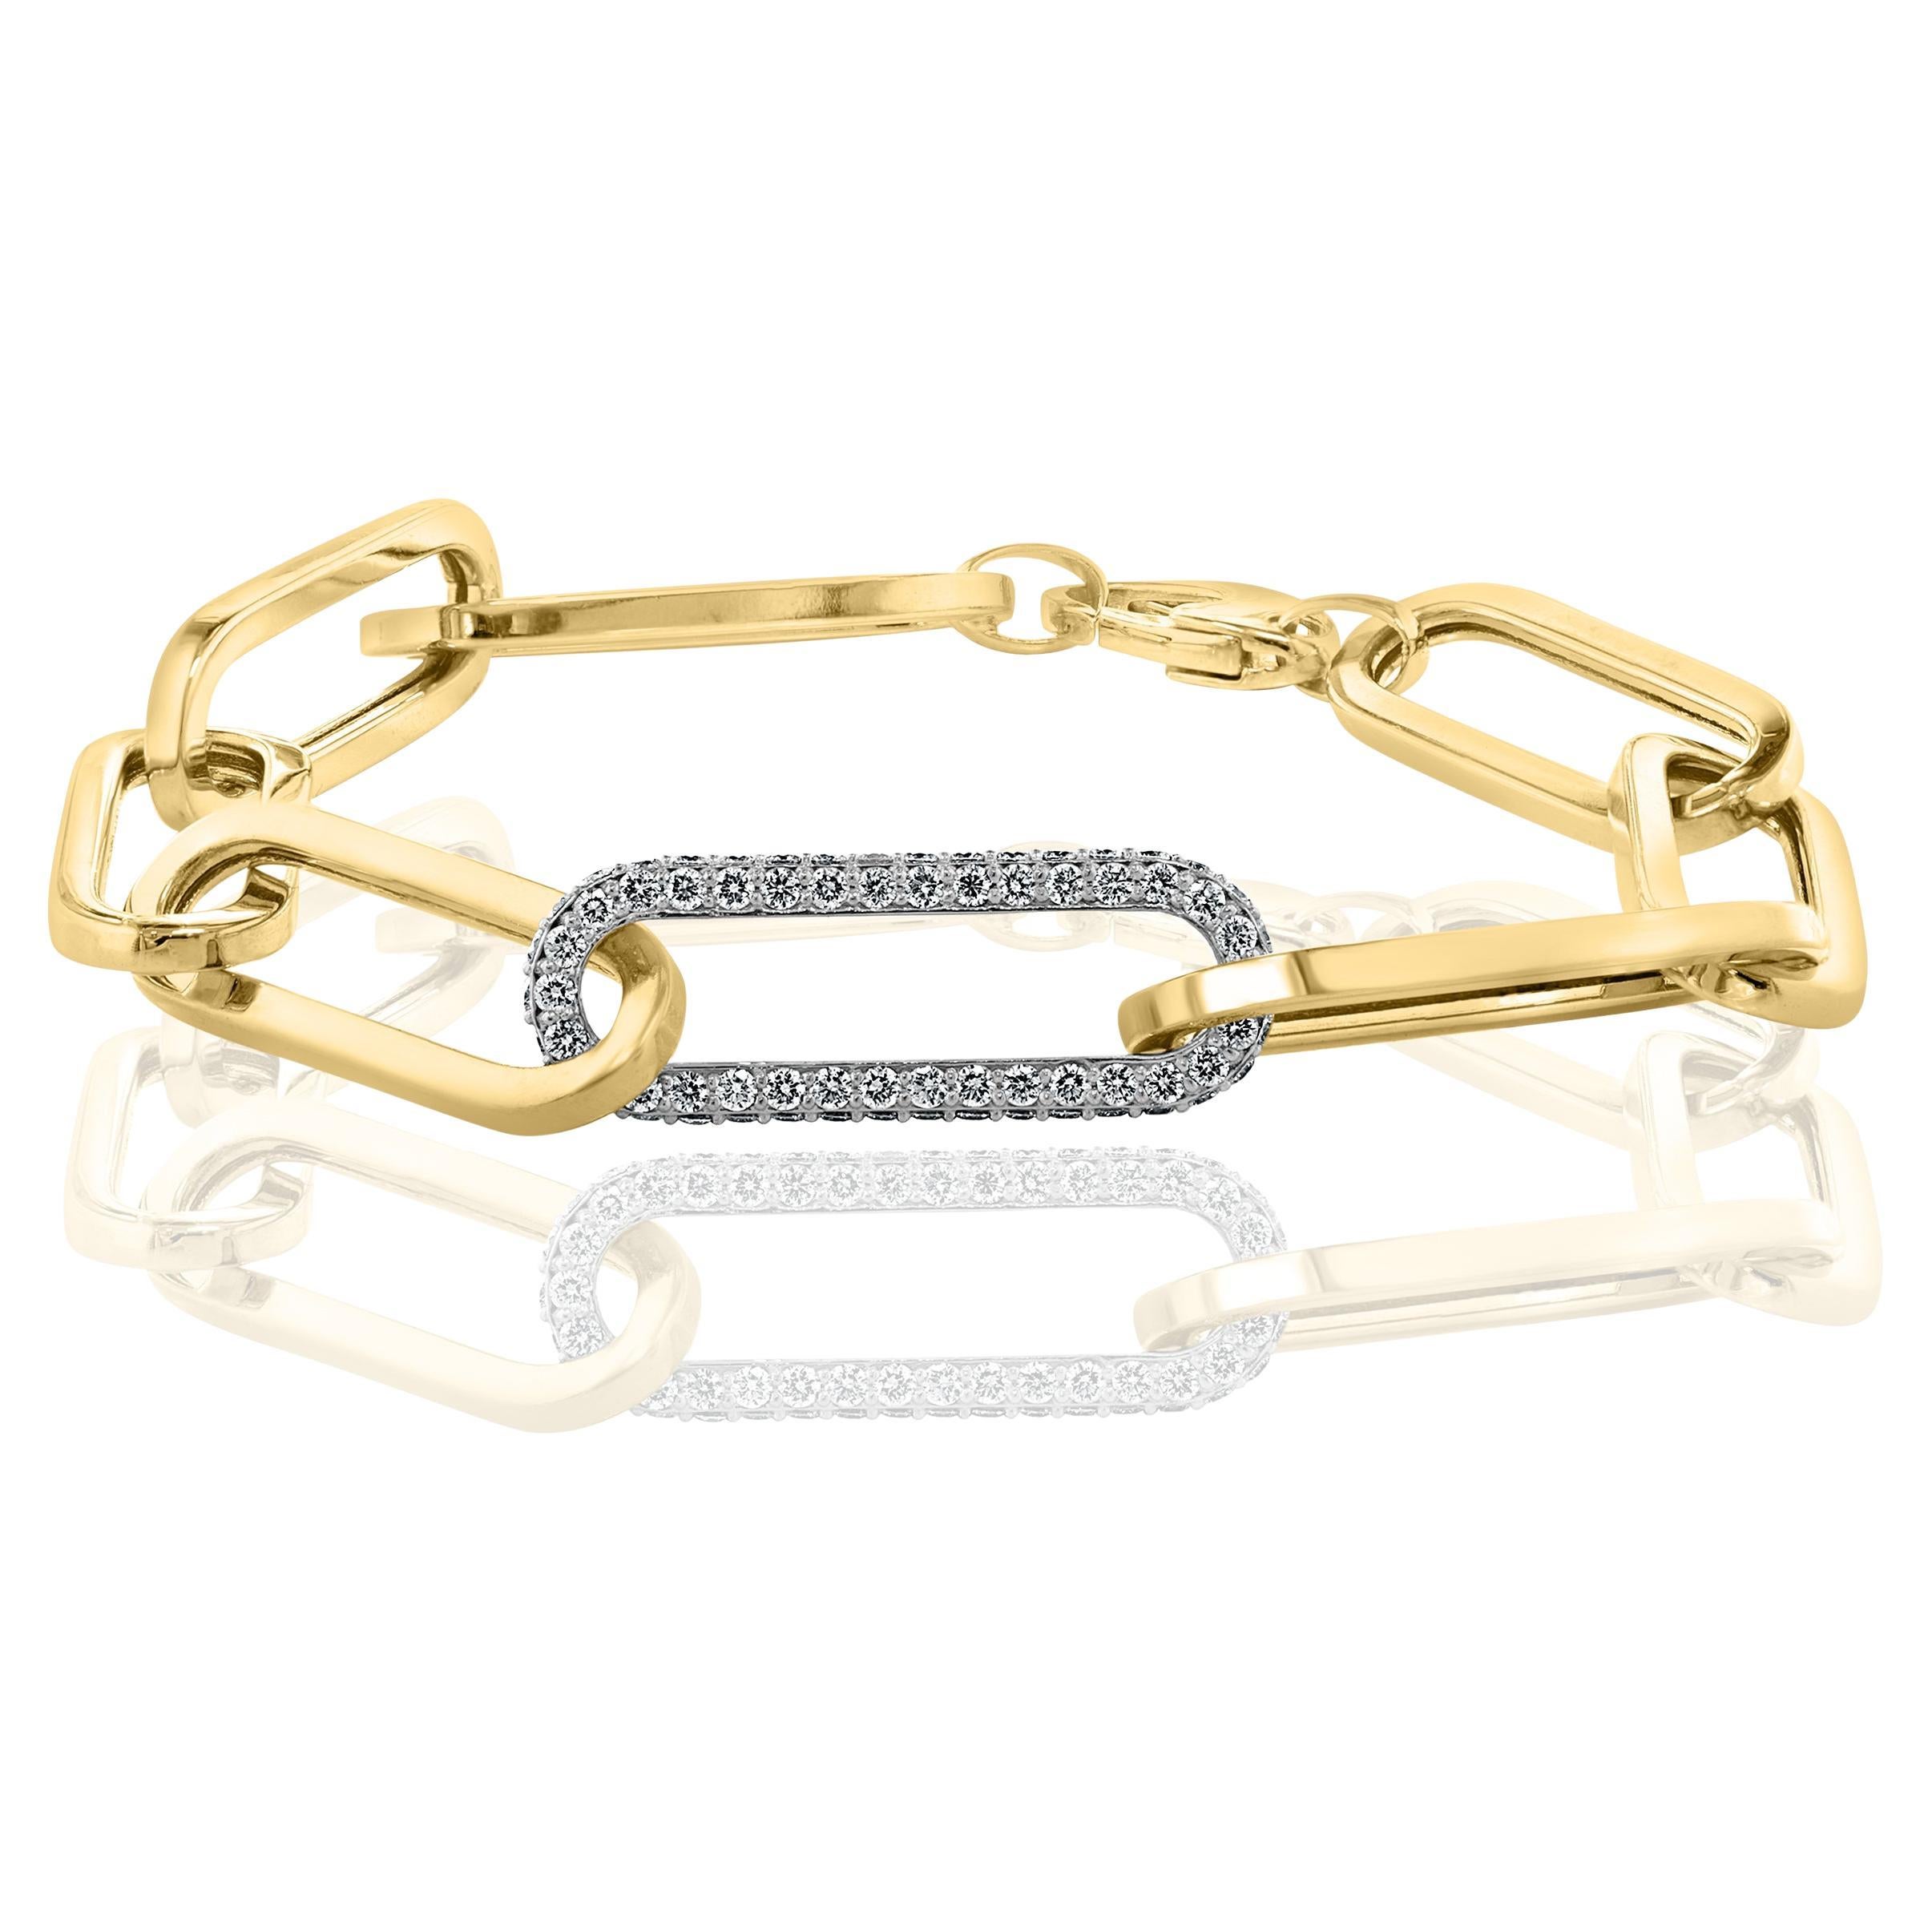 0.93 Carat Diamond Paper Clip Bracelet in 14K Yellow Gold and White Gold